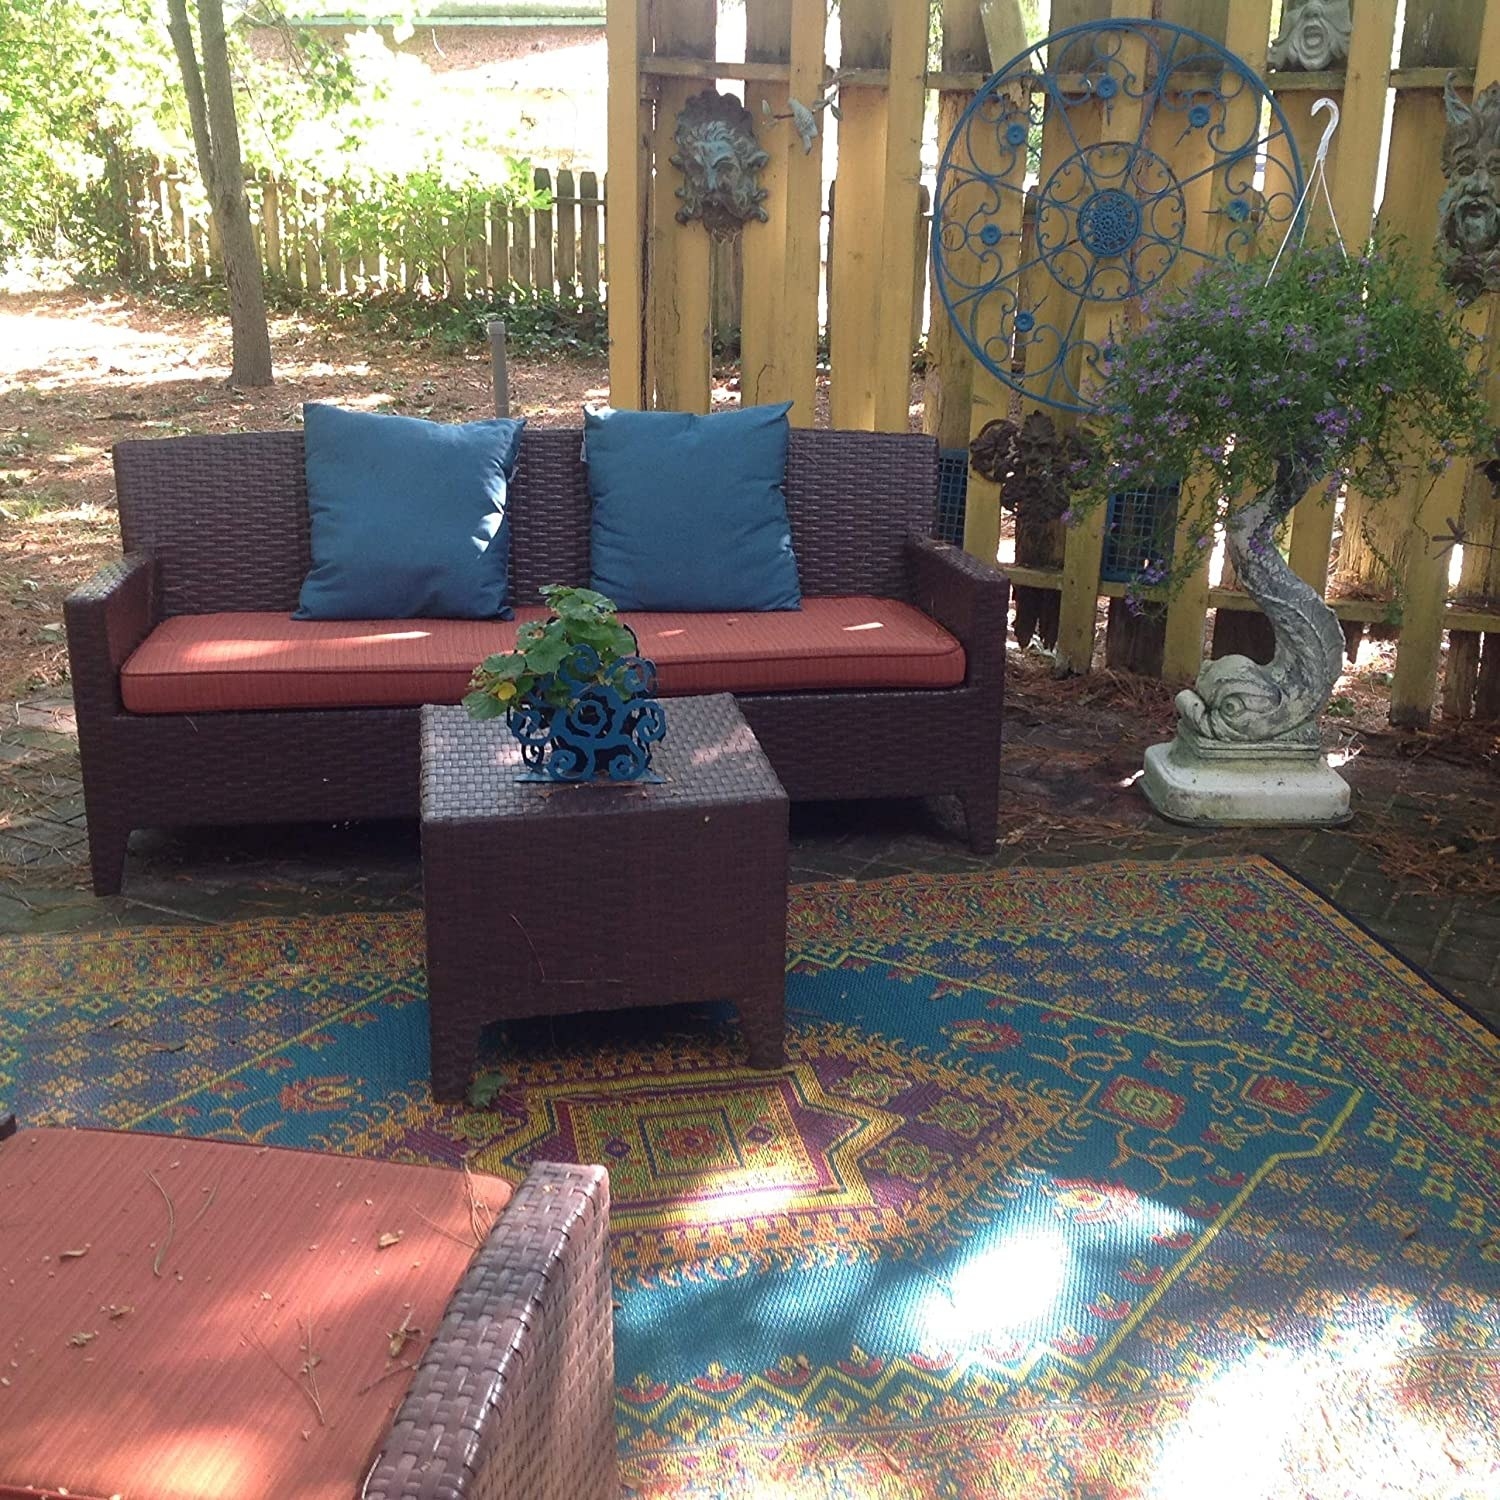 outdoor room with the rug pulling all the decor together